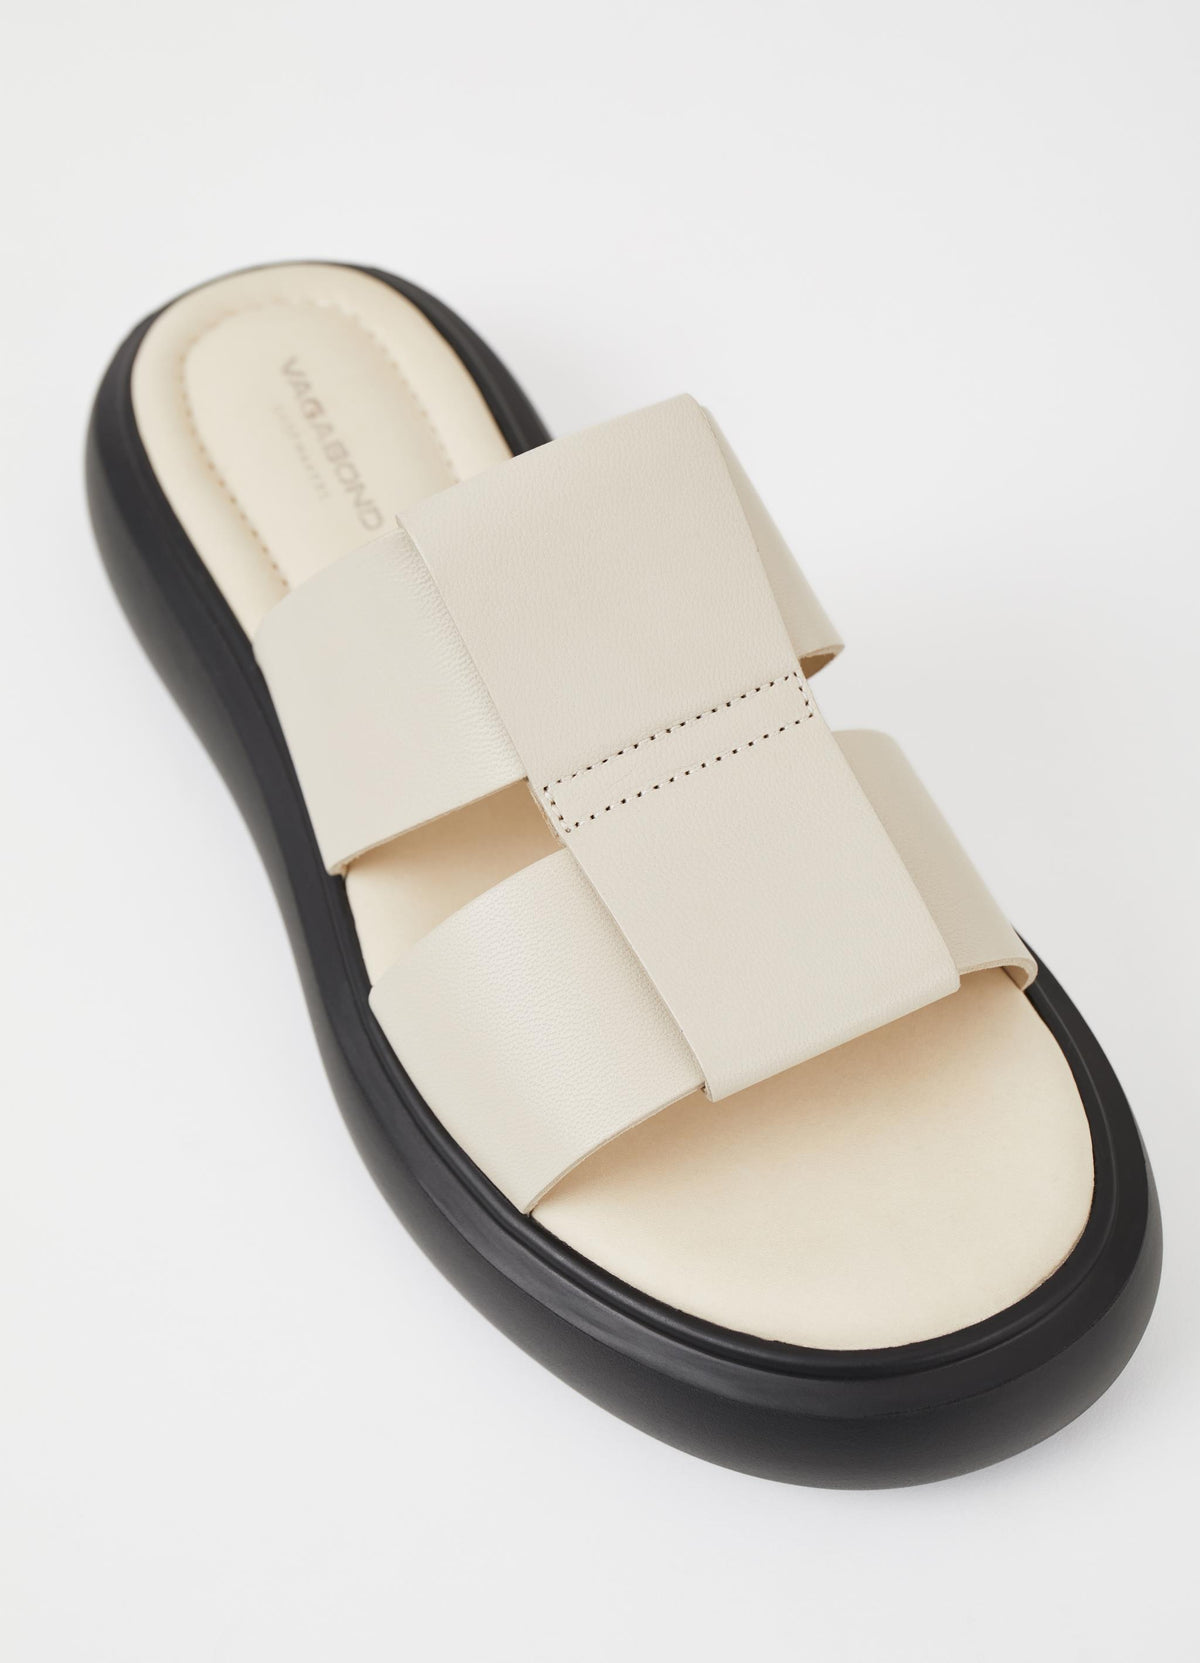 Off white leather slider with a black rubber sole